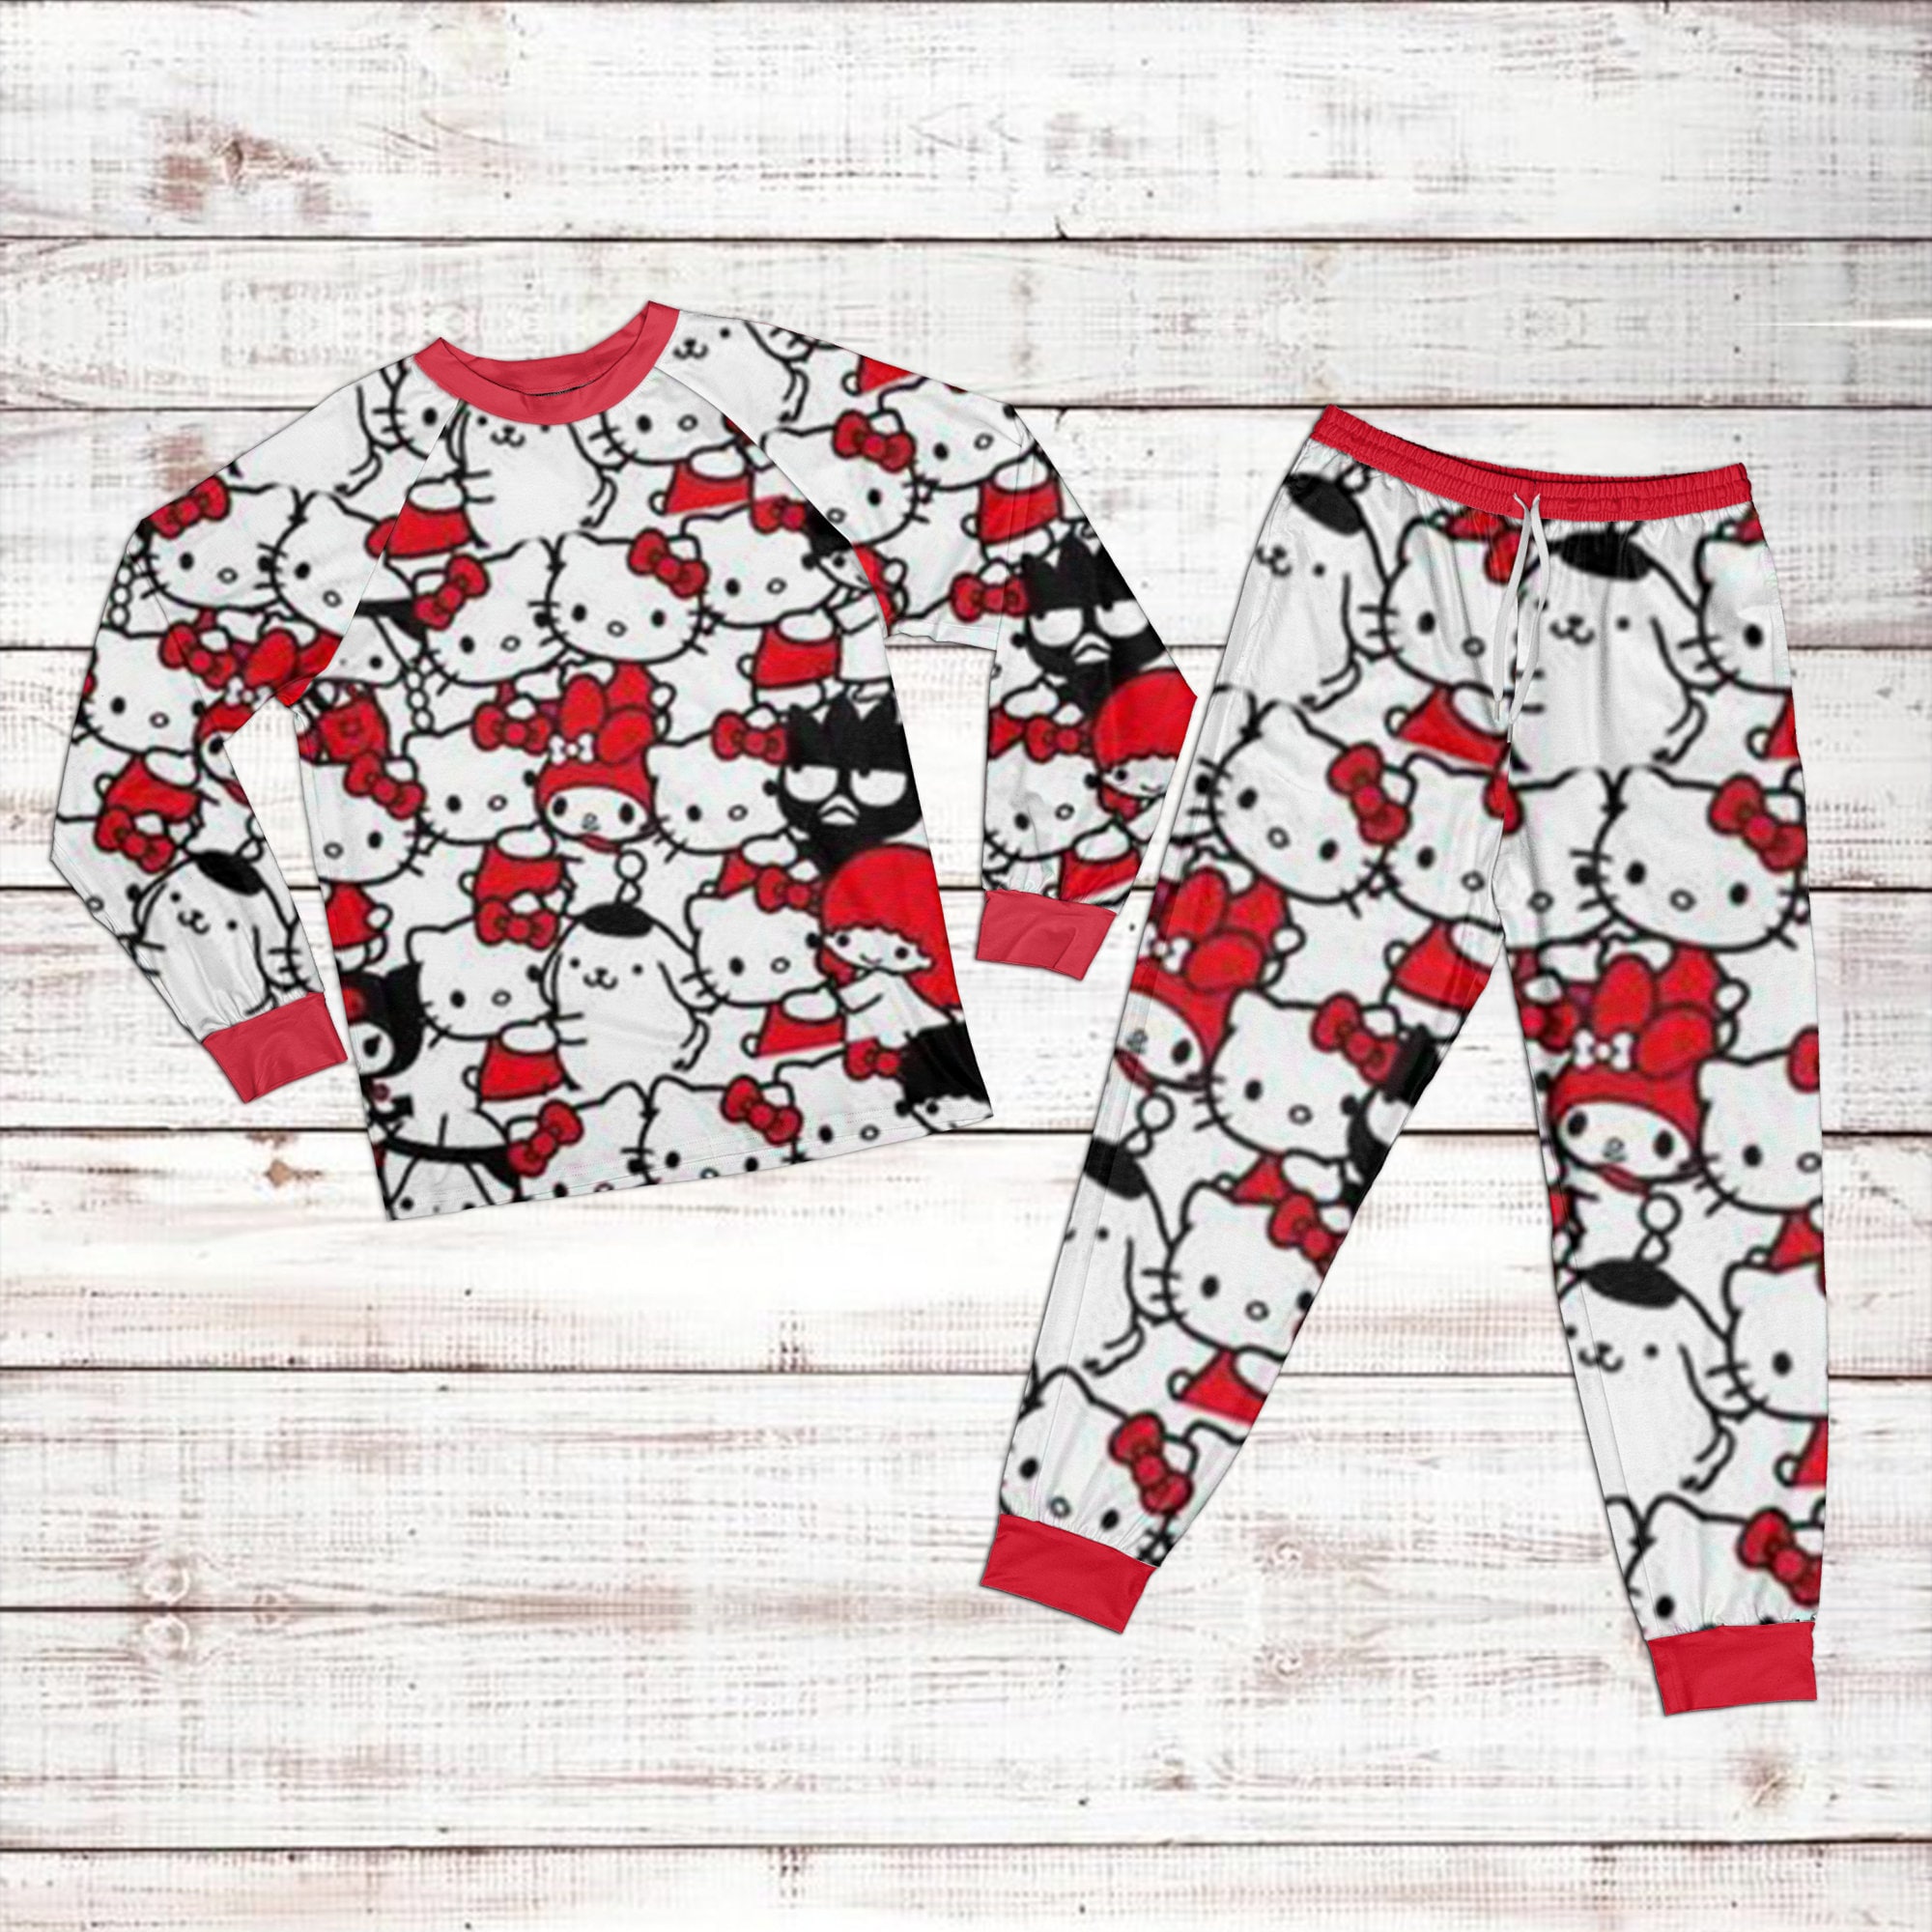 Shop Hello Kitty Printed Briefs with Elasticised Waistband - Set of 5  Online